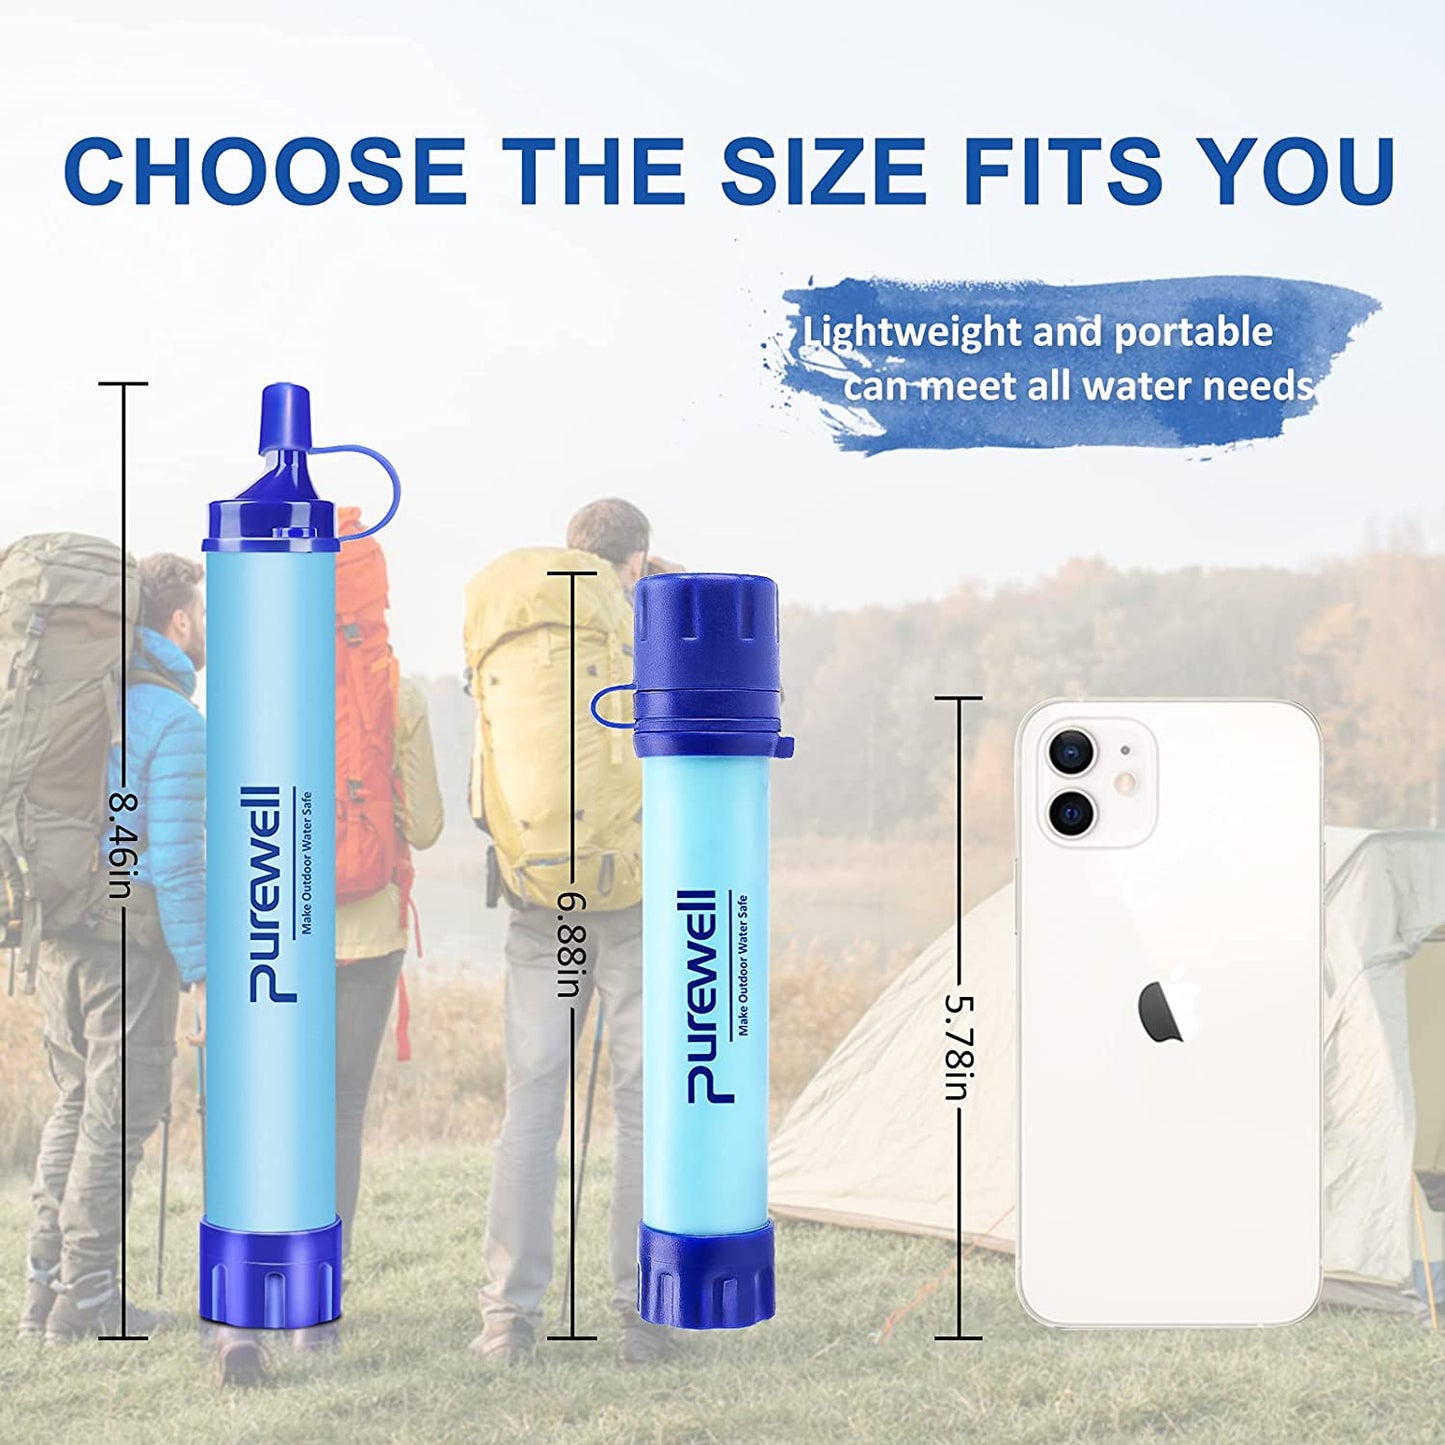 Outdoor Water Filter Personal Water Filtration Straw Emergency Survival Gear Water Purifier for Camping Hiking Climbing Backpacking